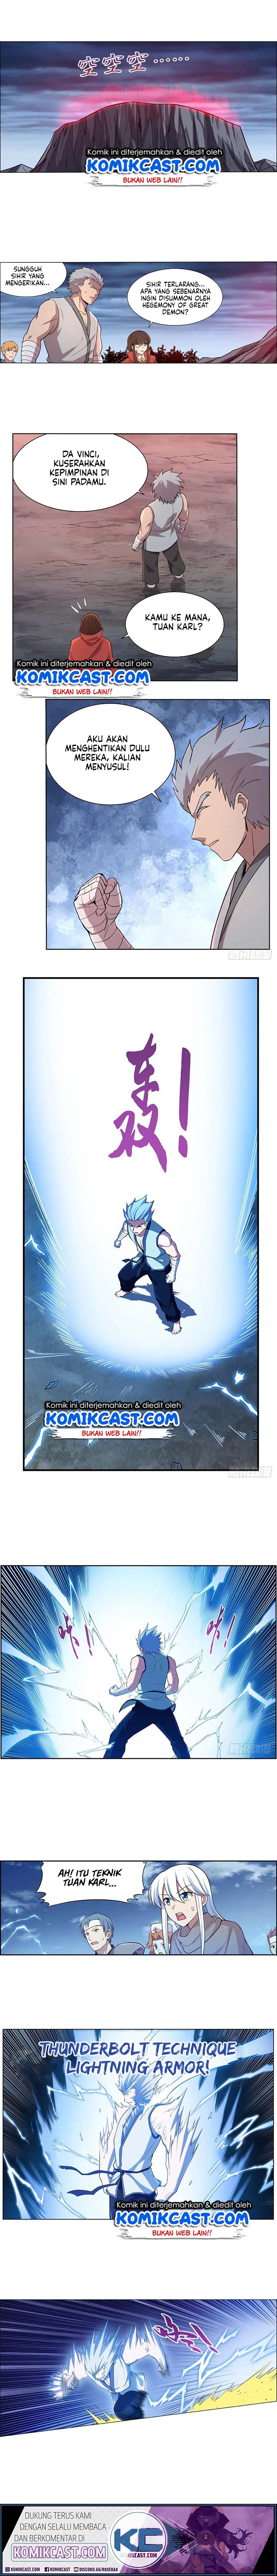 The Demon King Who Lost His Job Chapter 138